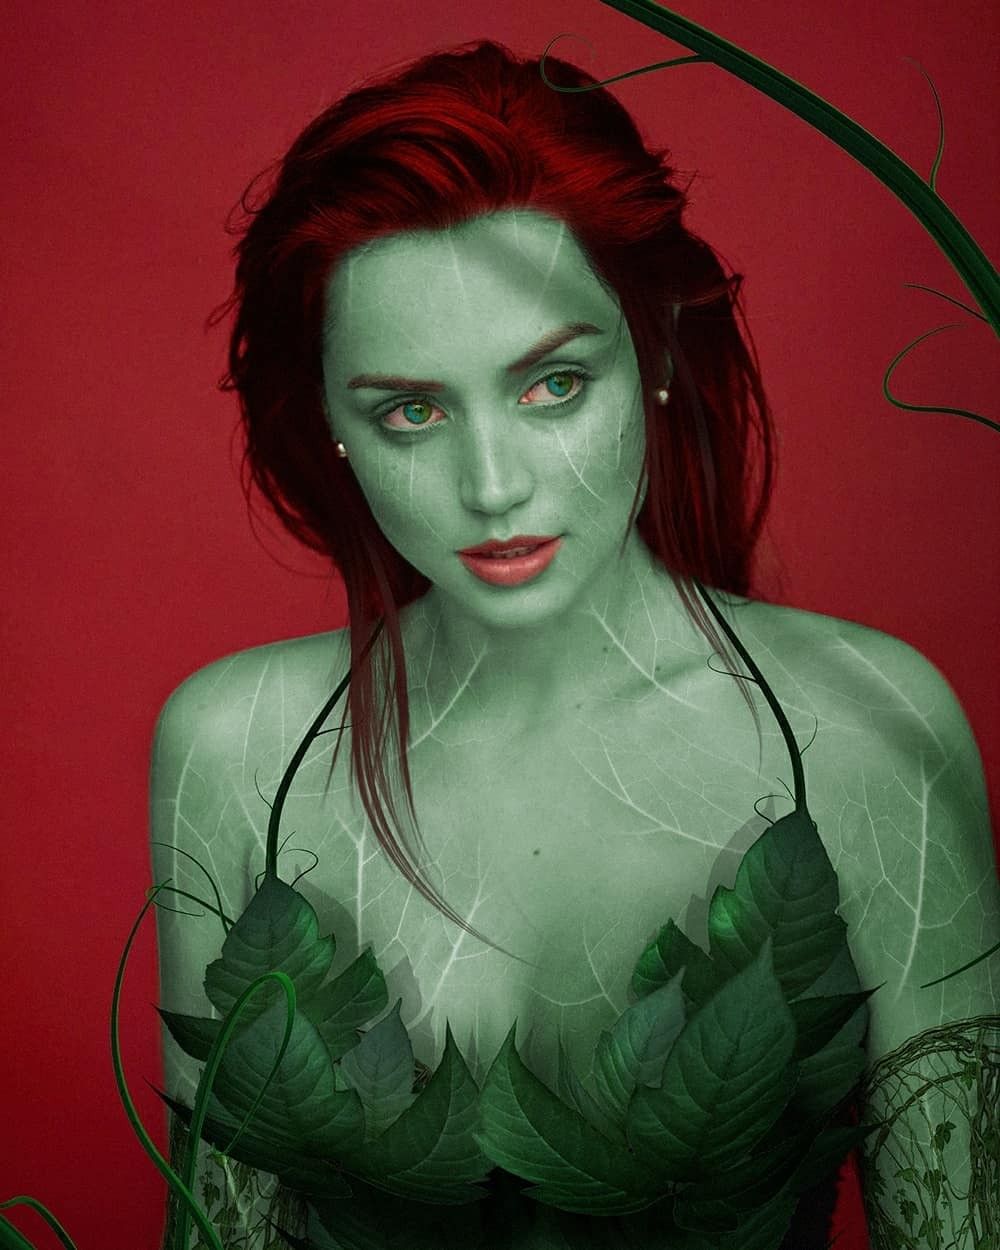 Here’s What Ana de Armas Could Look Like As Poison Ivy In The DCEU